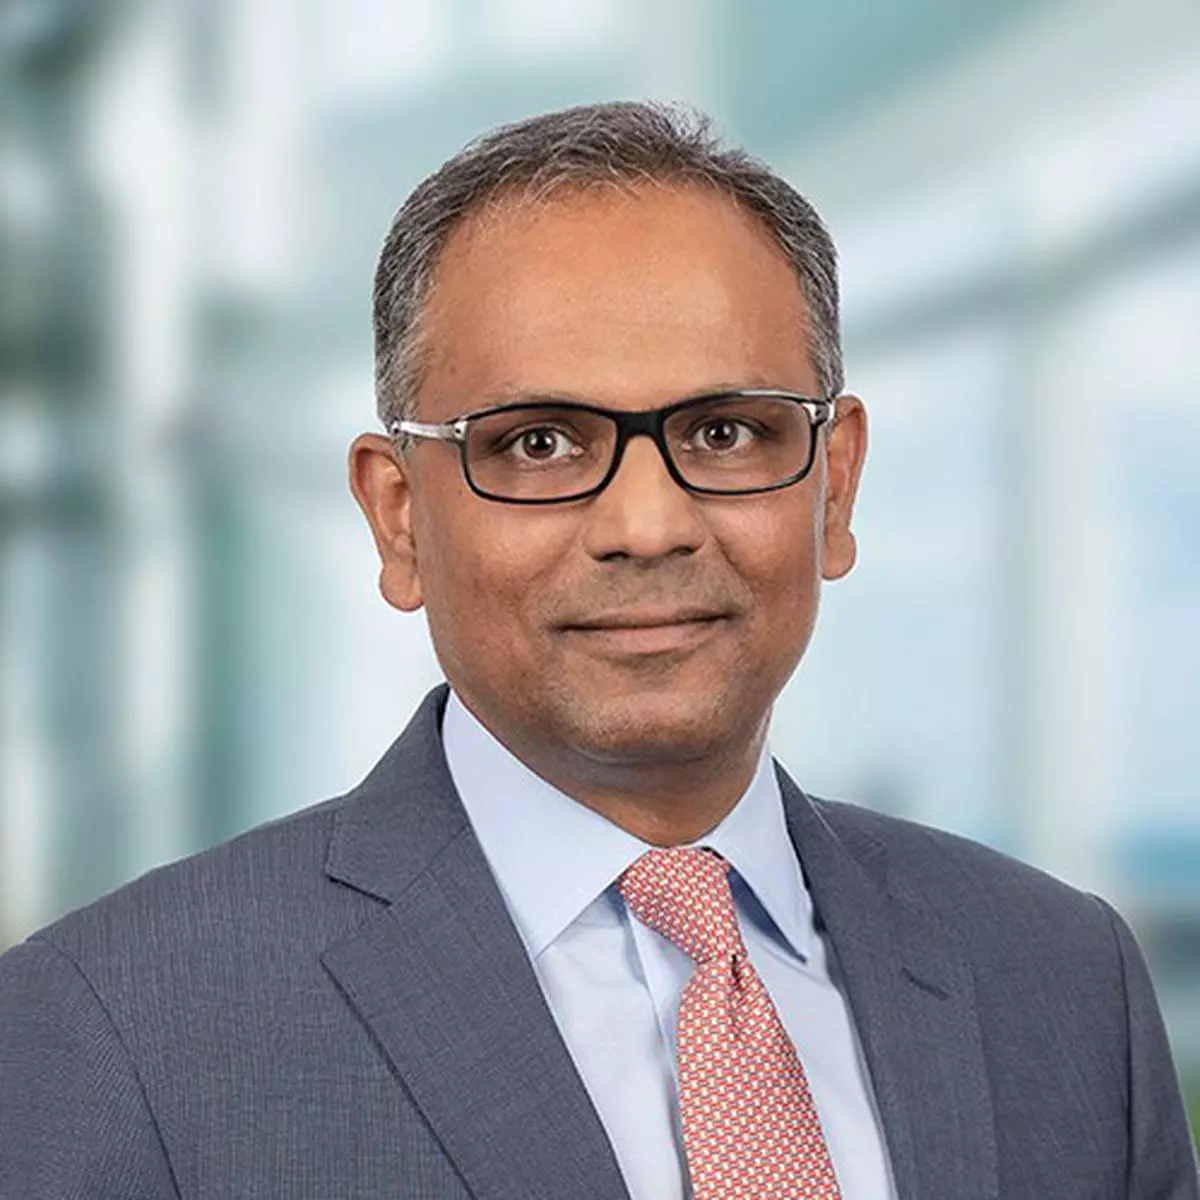 Rajiv Jain, Chairman and Chief Investment Officer of GQG Partners